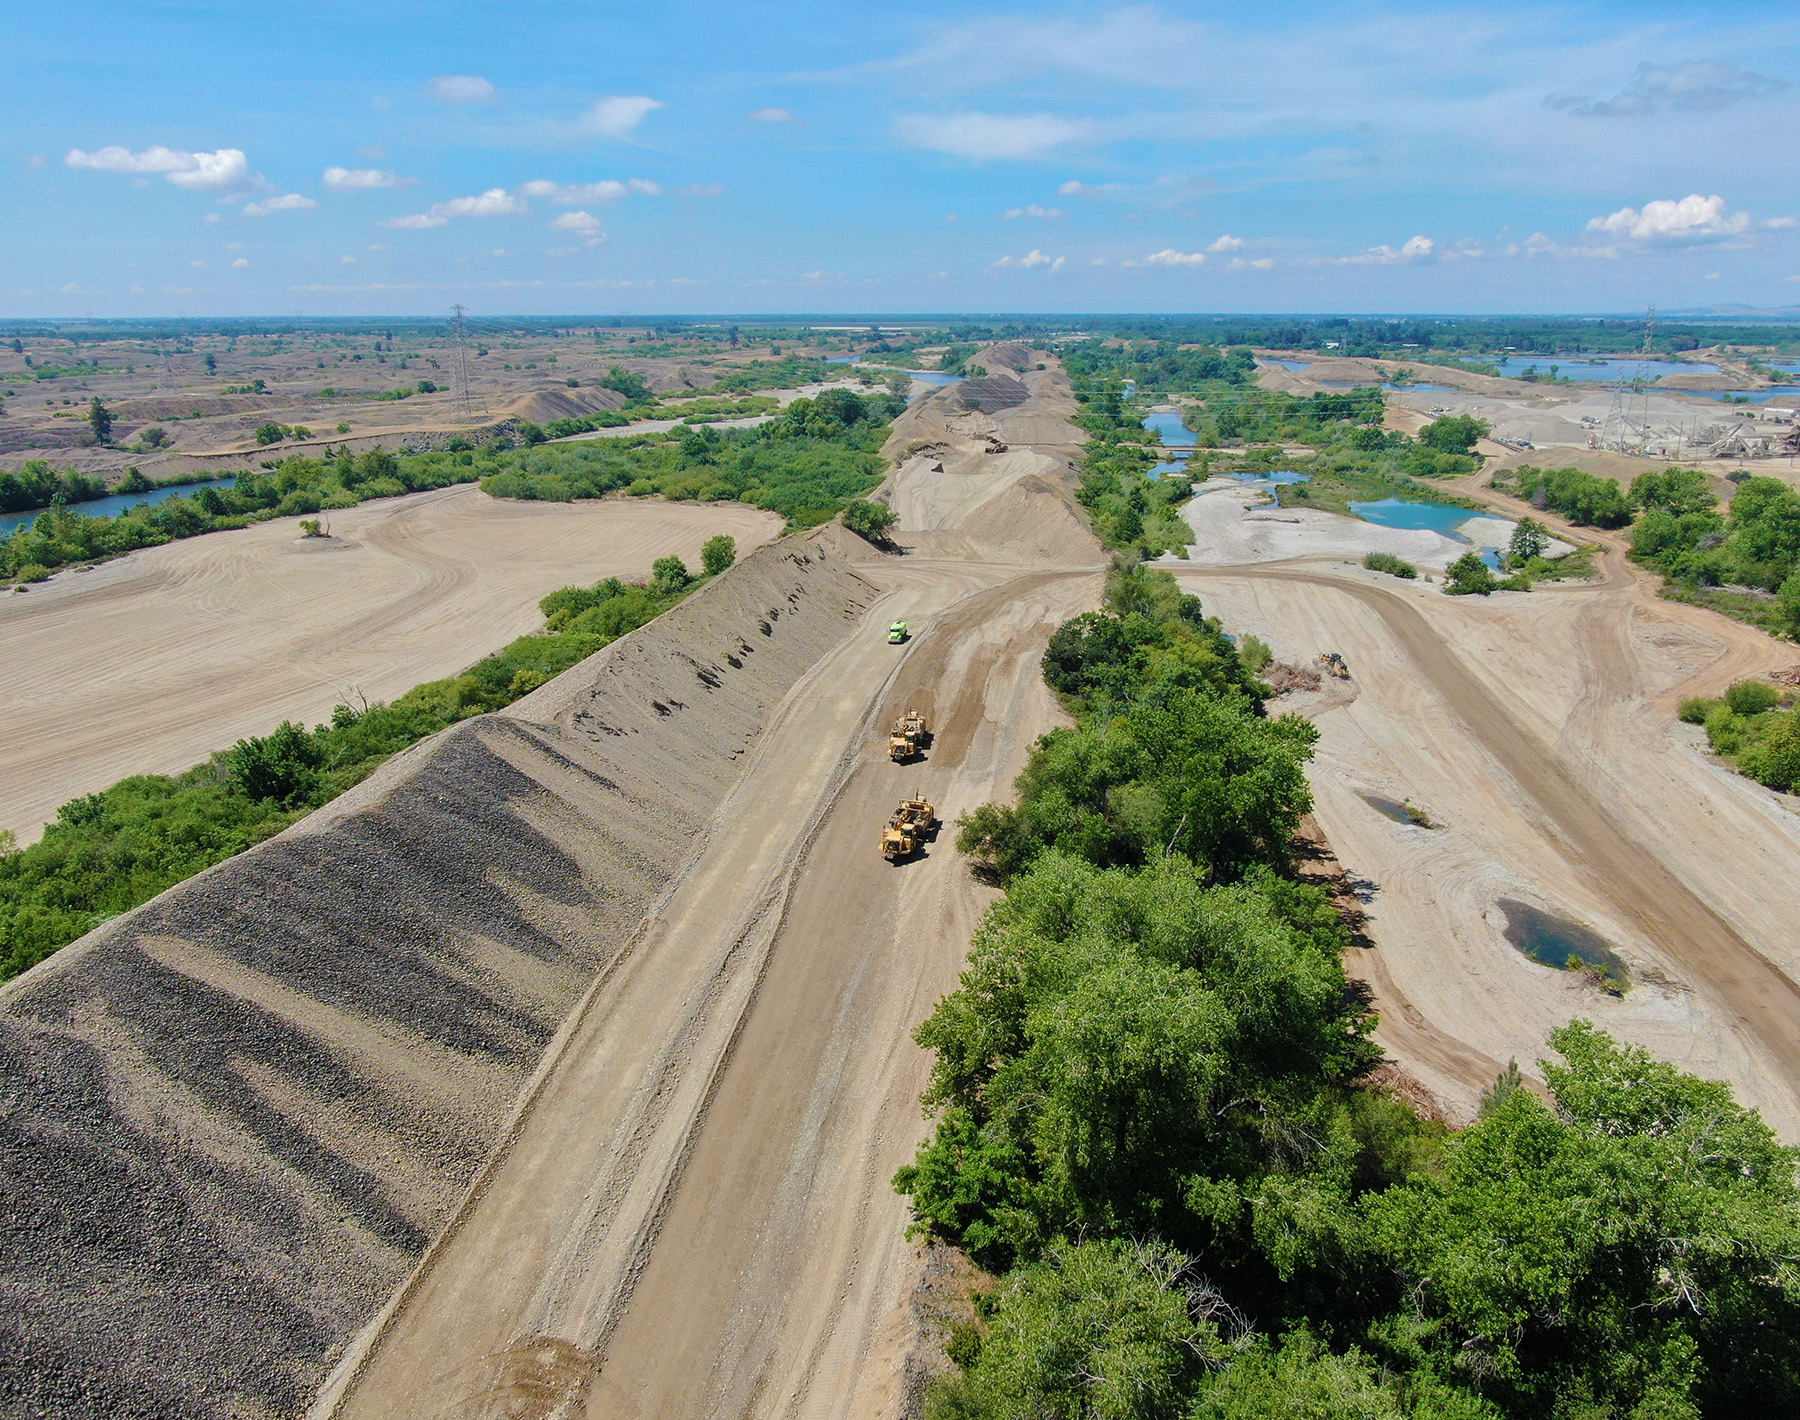 photograph showing land punctuated by meandering waterways, construction equipment, and trees